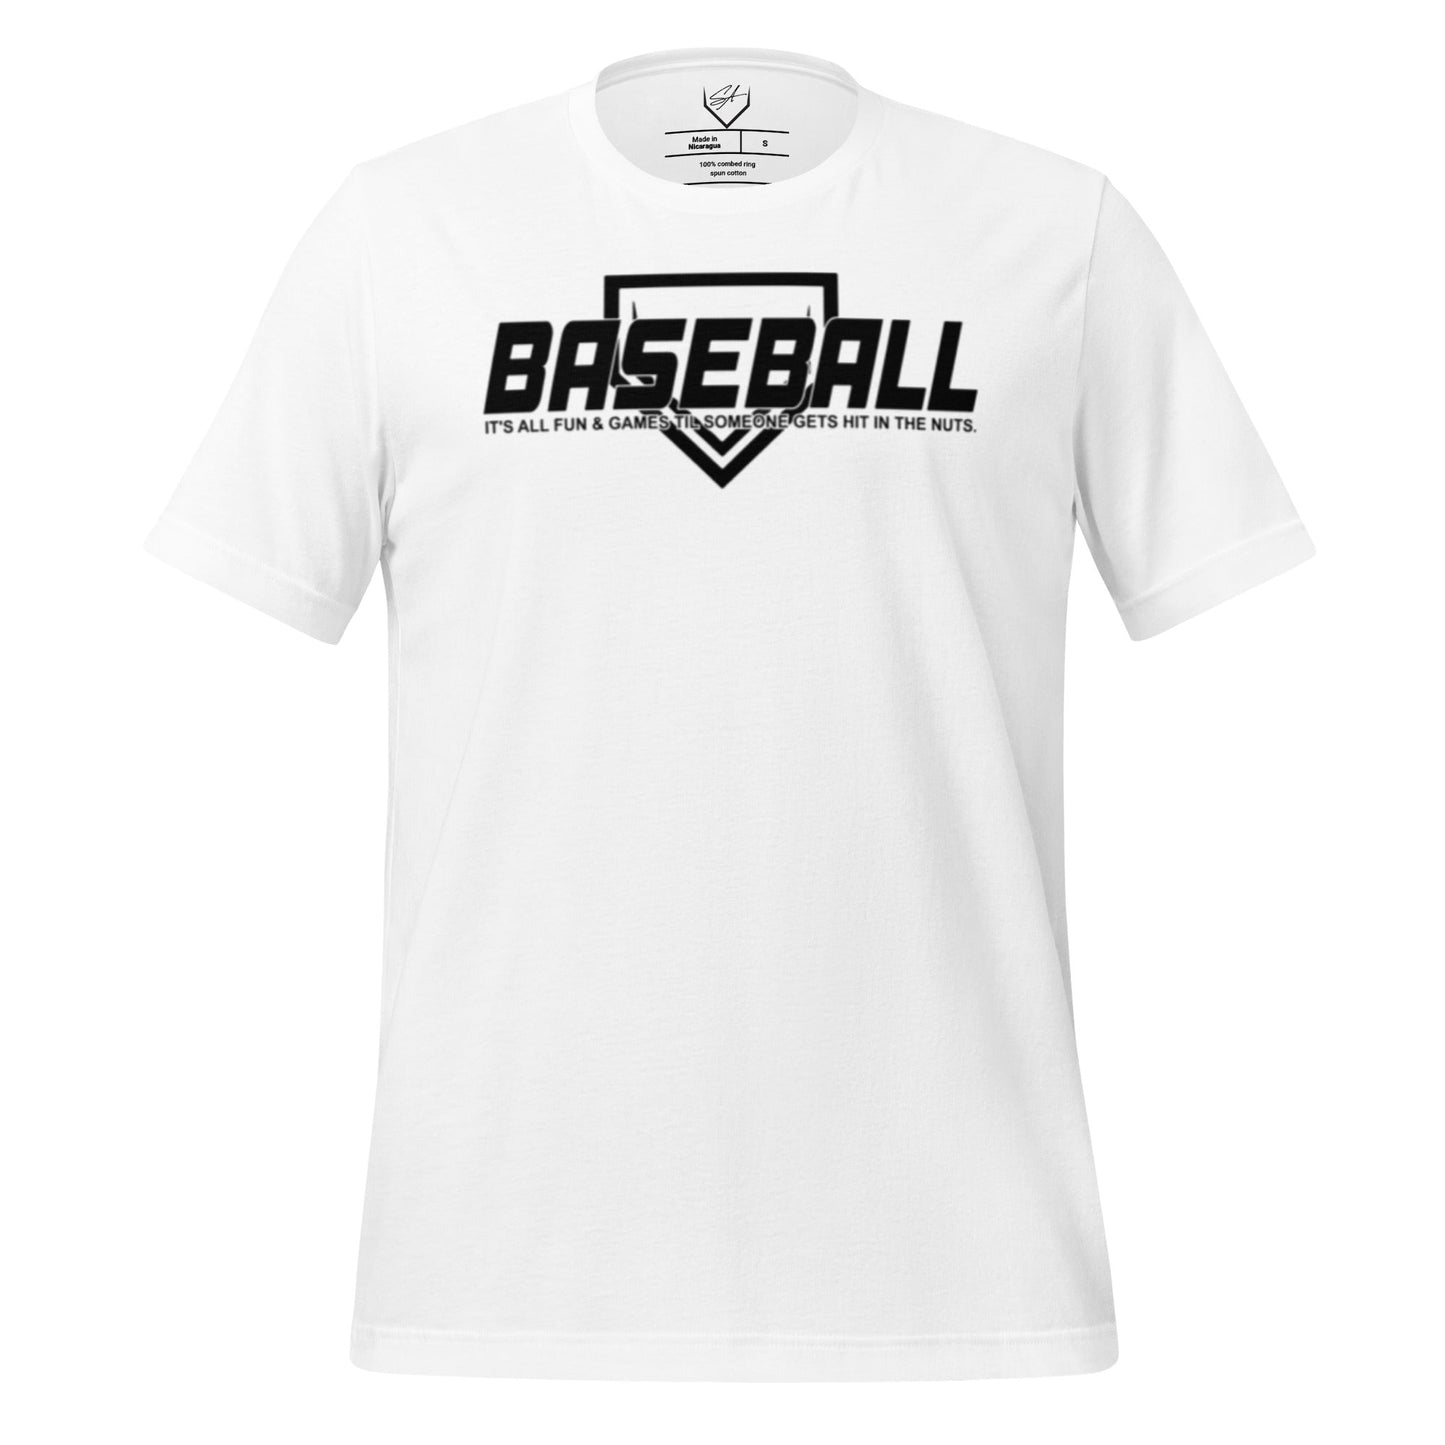 Baseball Its All Fun and Games - Adult Tee